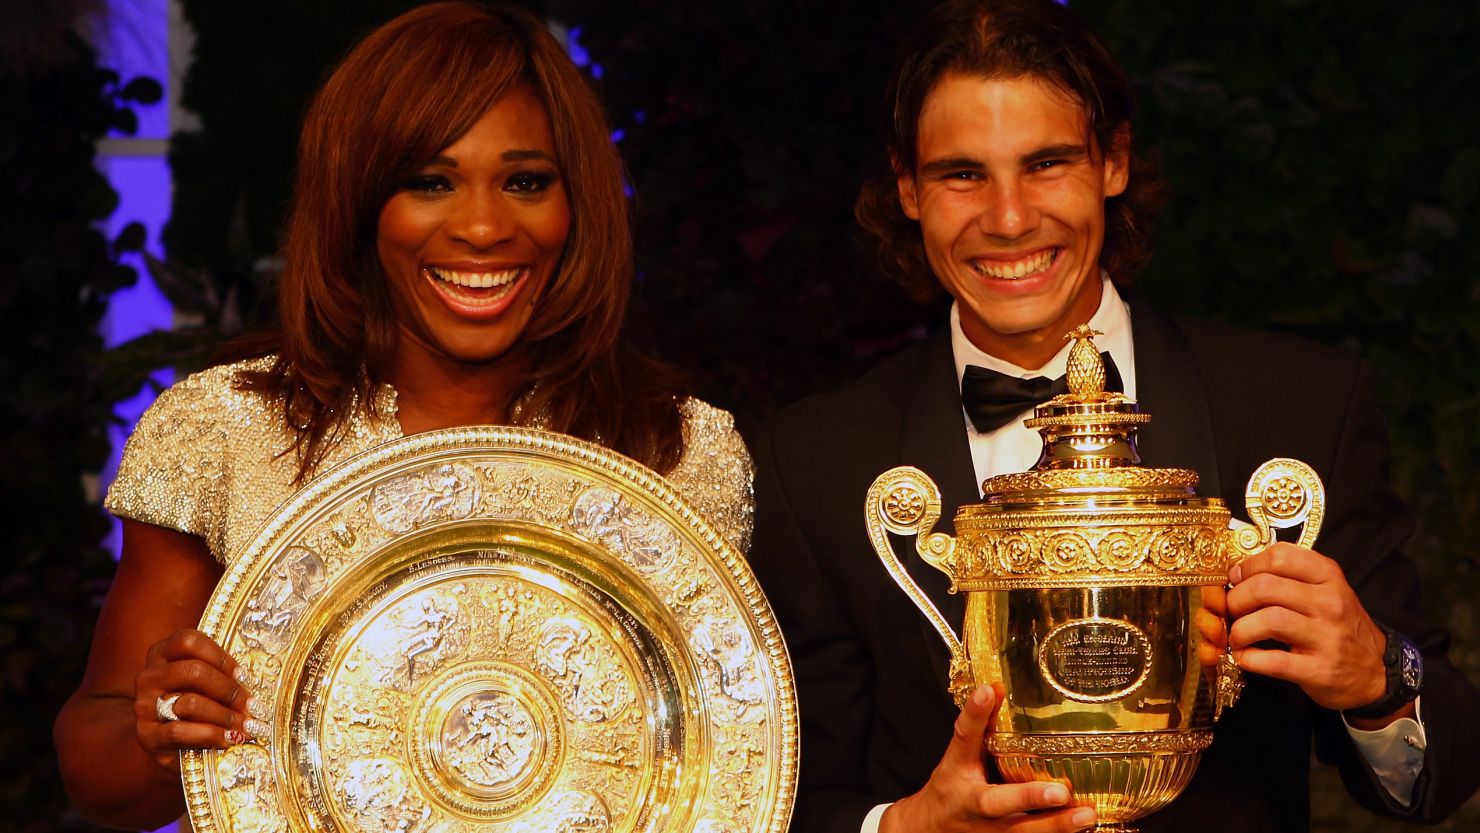 Serena Williams and Rafael Nadal won Wimbledon in 2010 but they have difficult draws this year. 